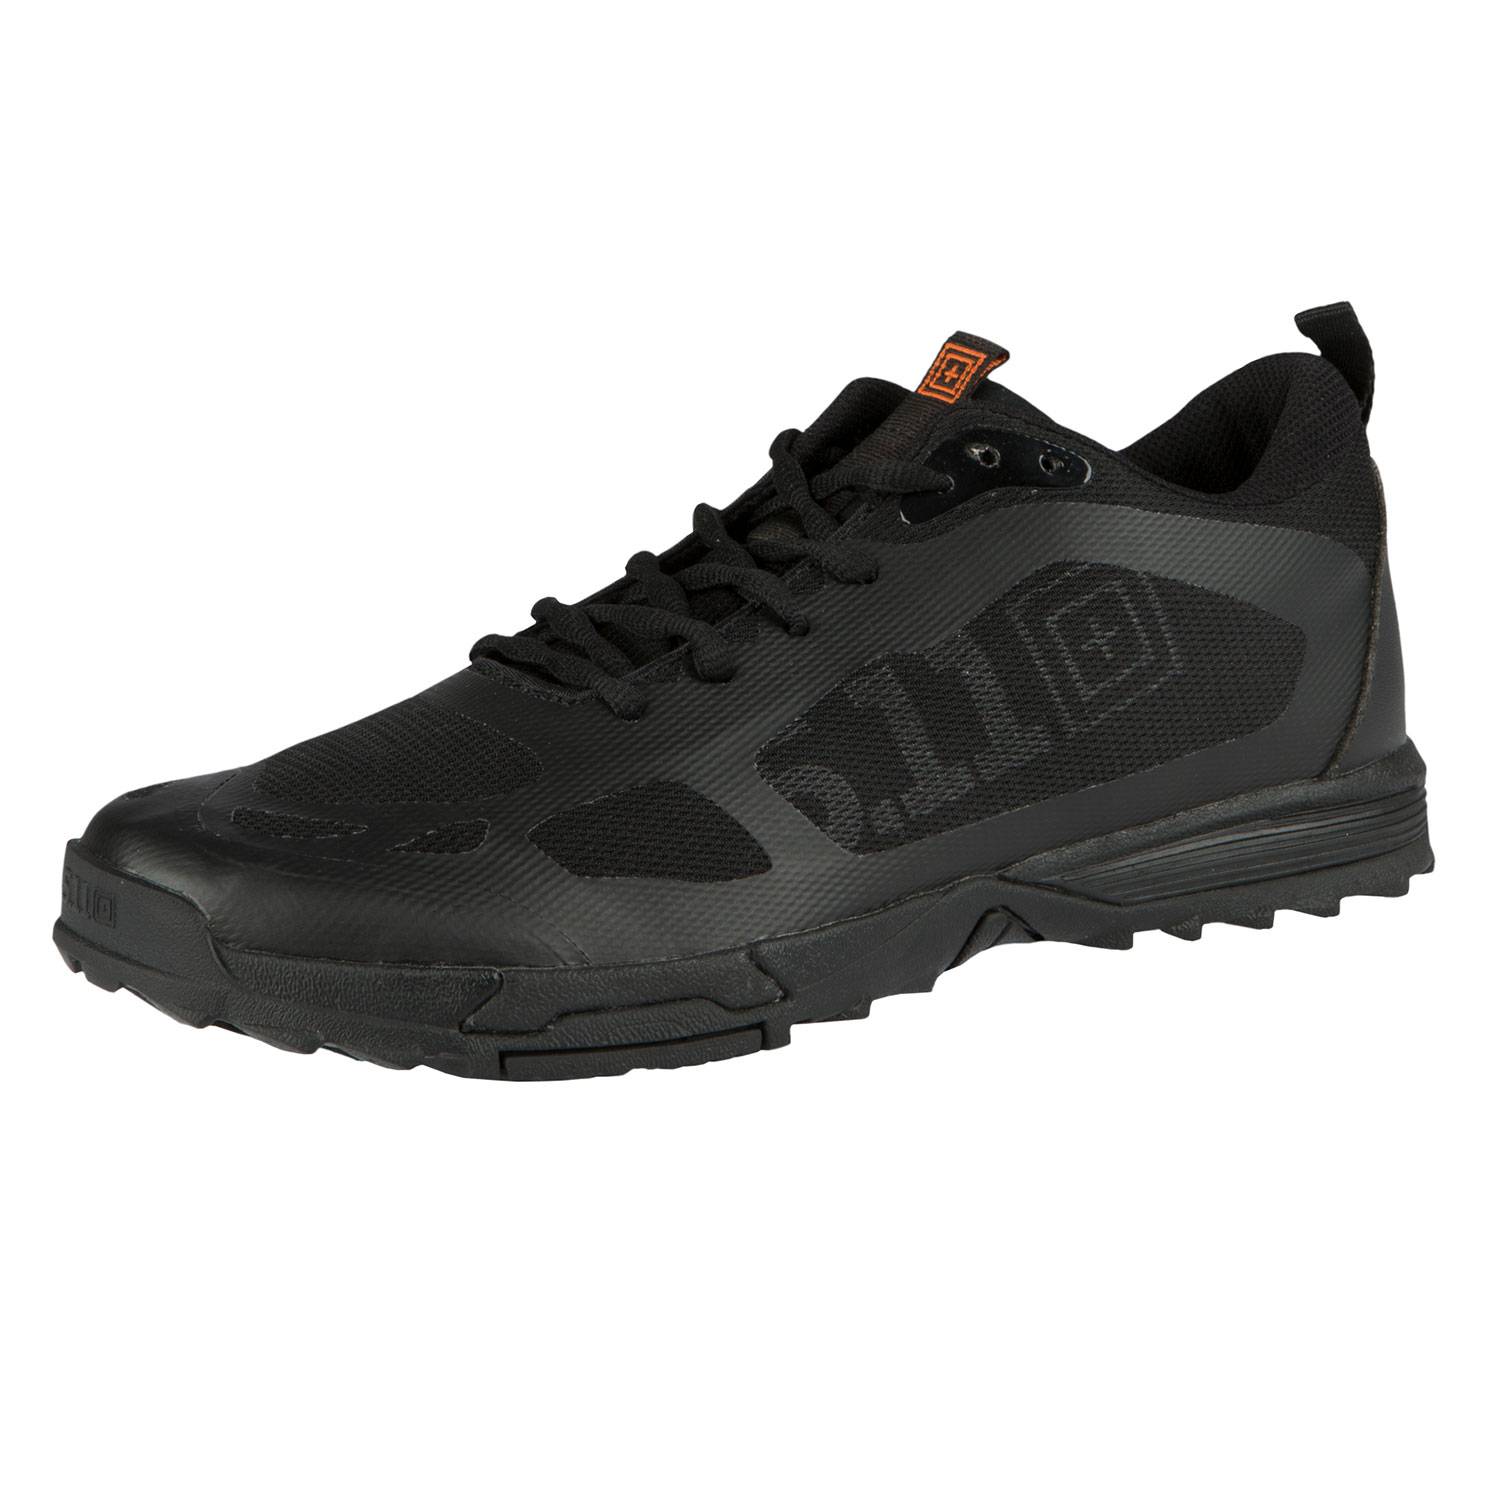 5.11 Tactical ABR Trainer